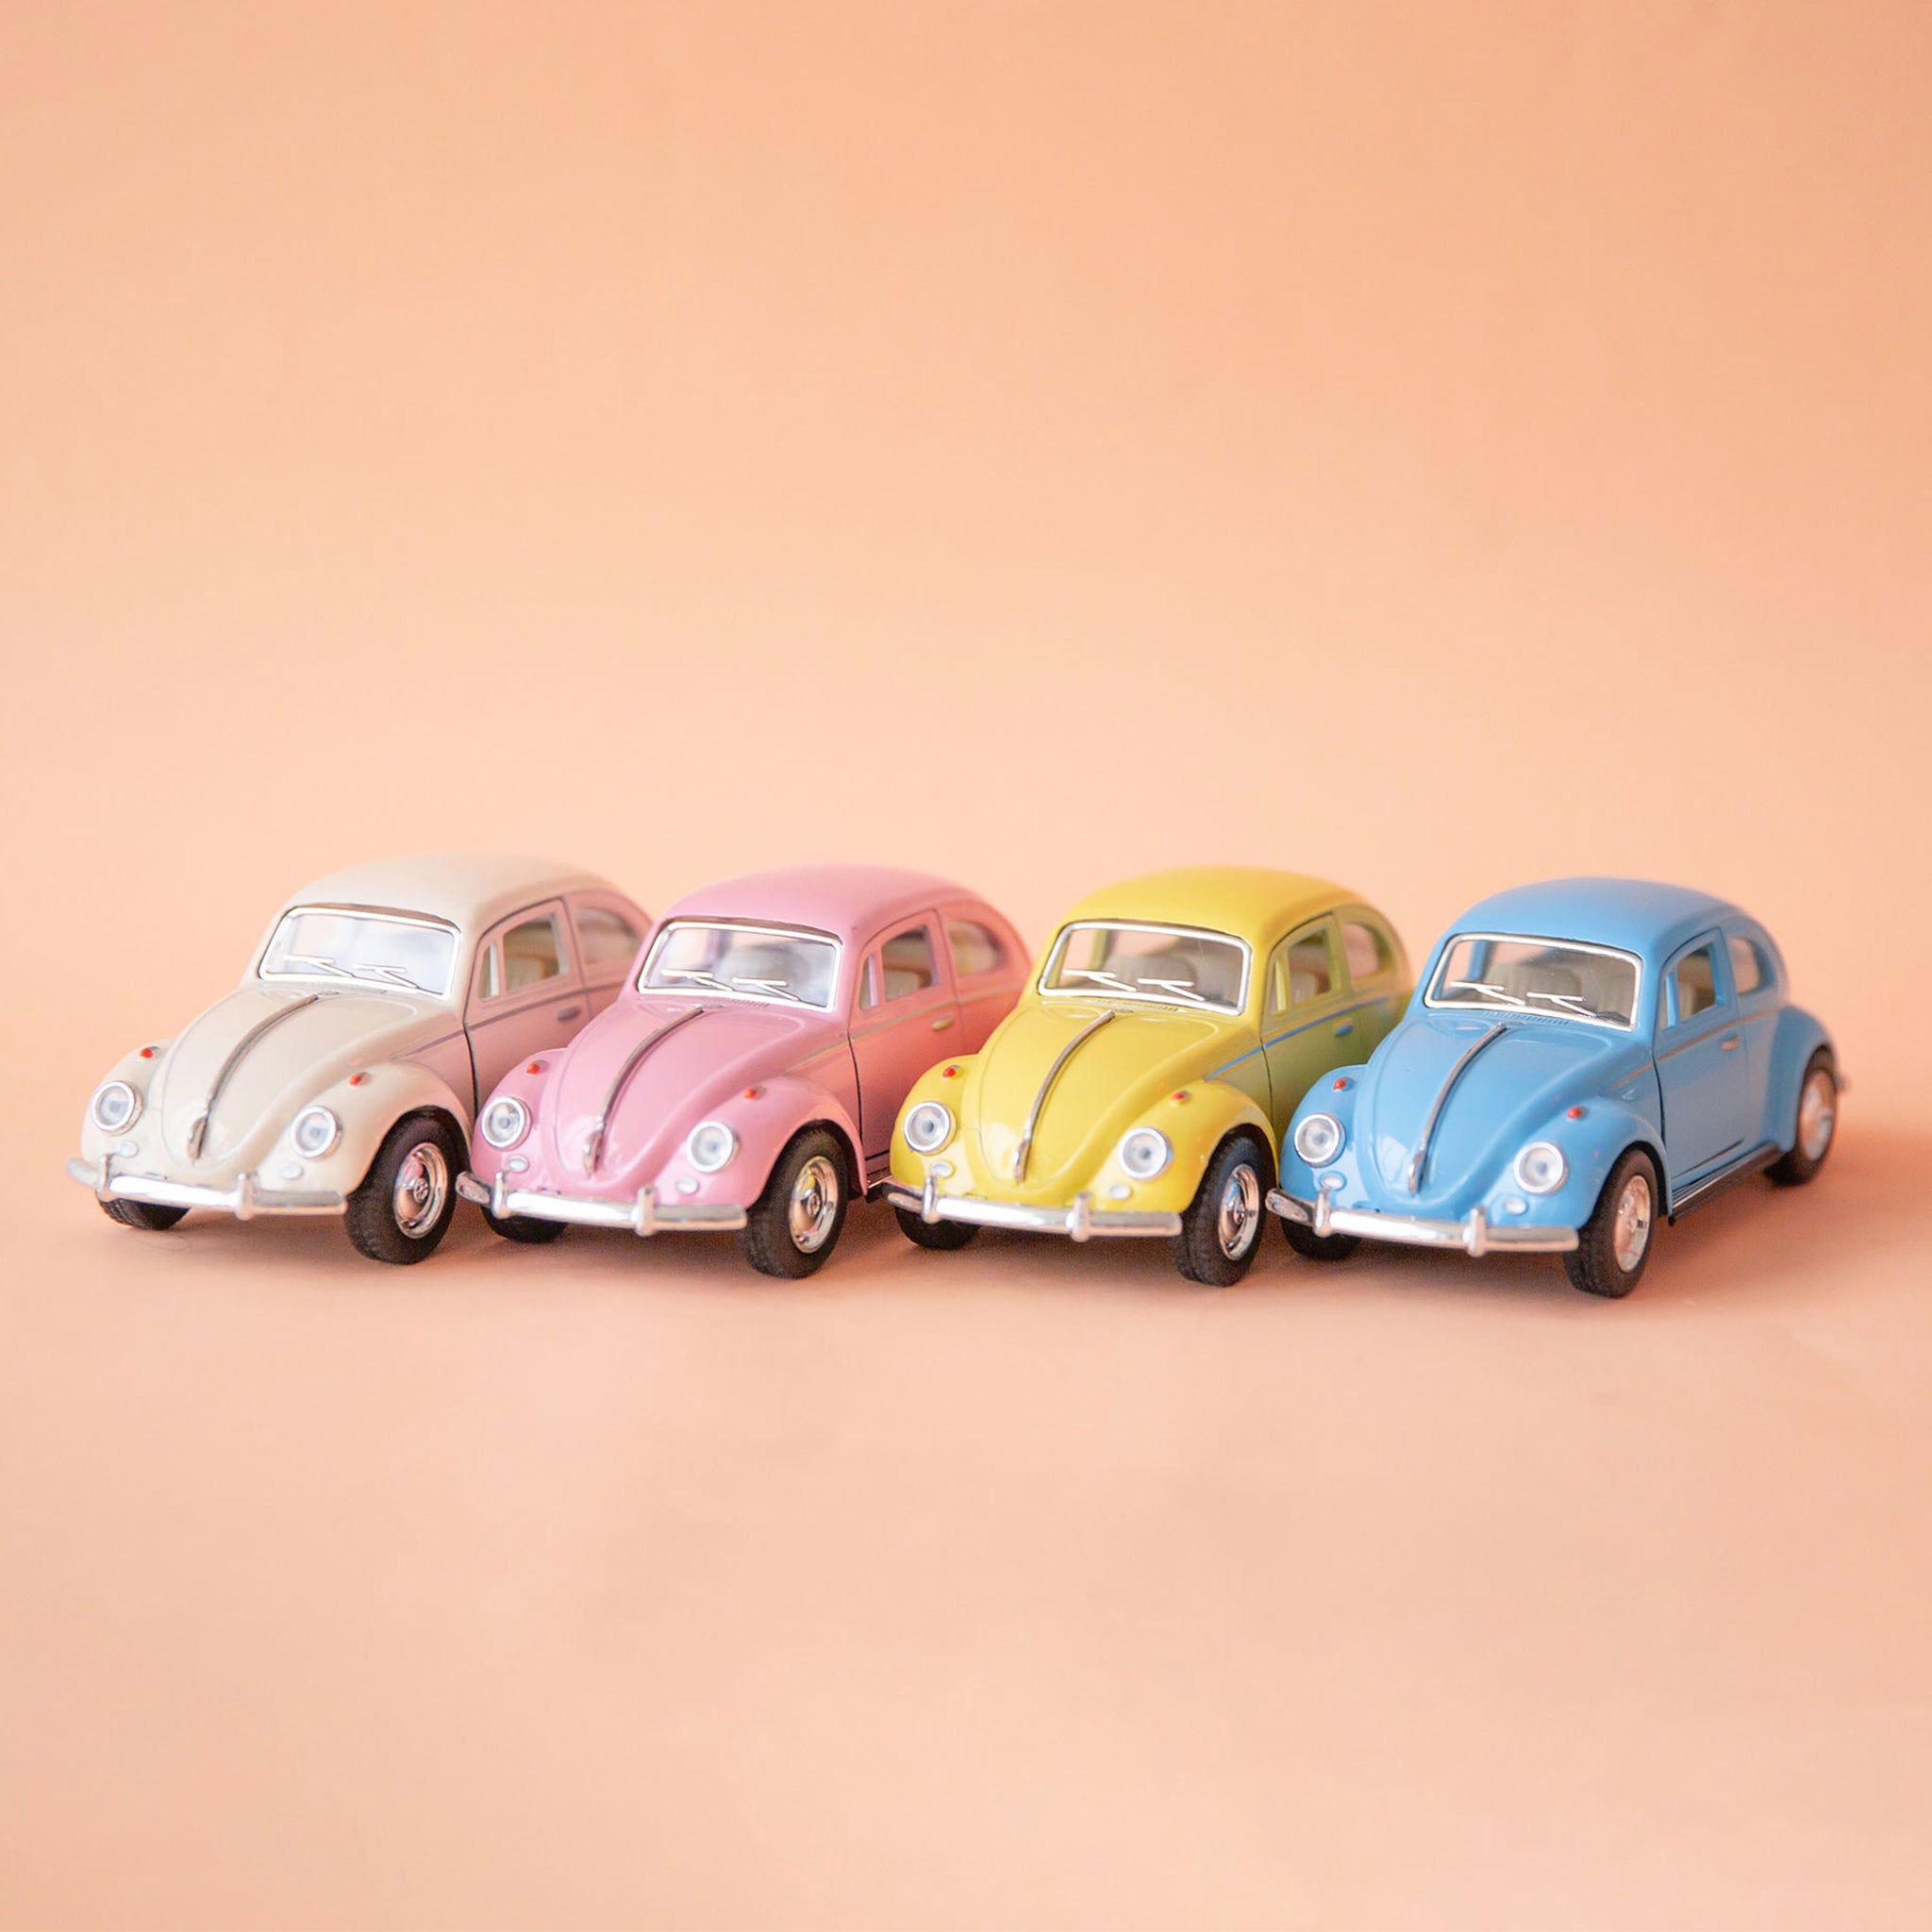 On a tan background is all four toy Volkswagen Beetle cars in a white, pink, yellow and blue color. 